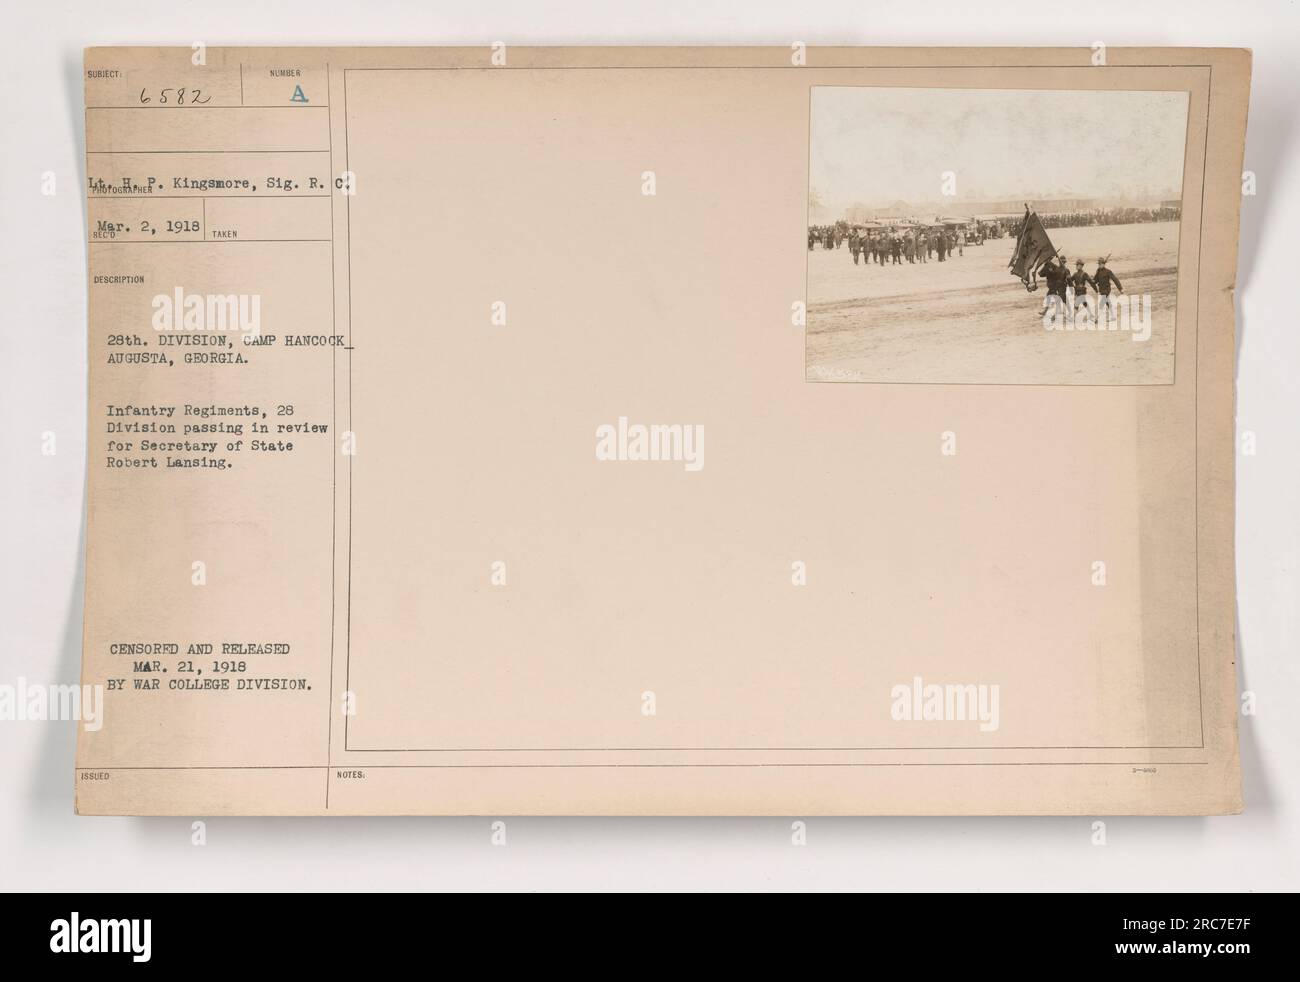 Infantry regiments of the 28th Division passing in review for Secretary ...